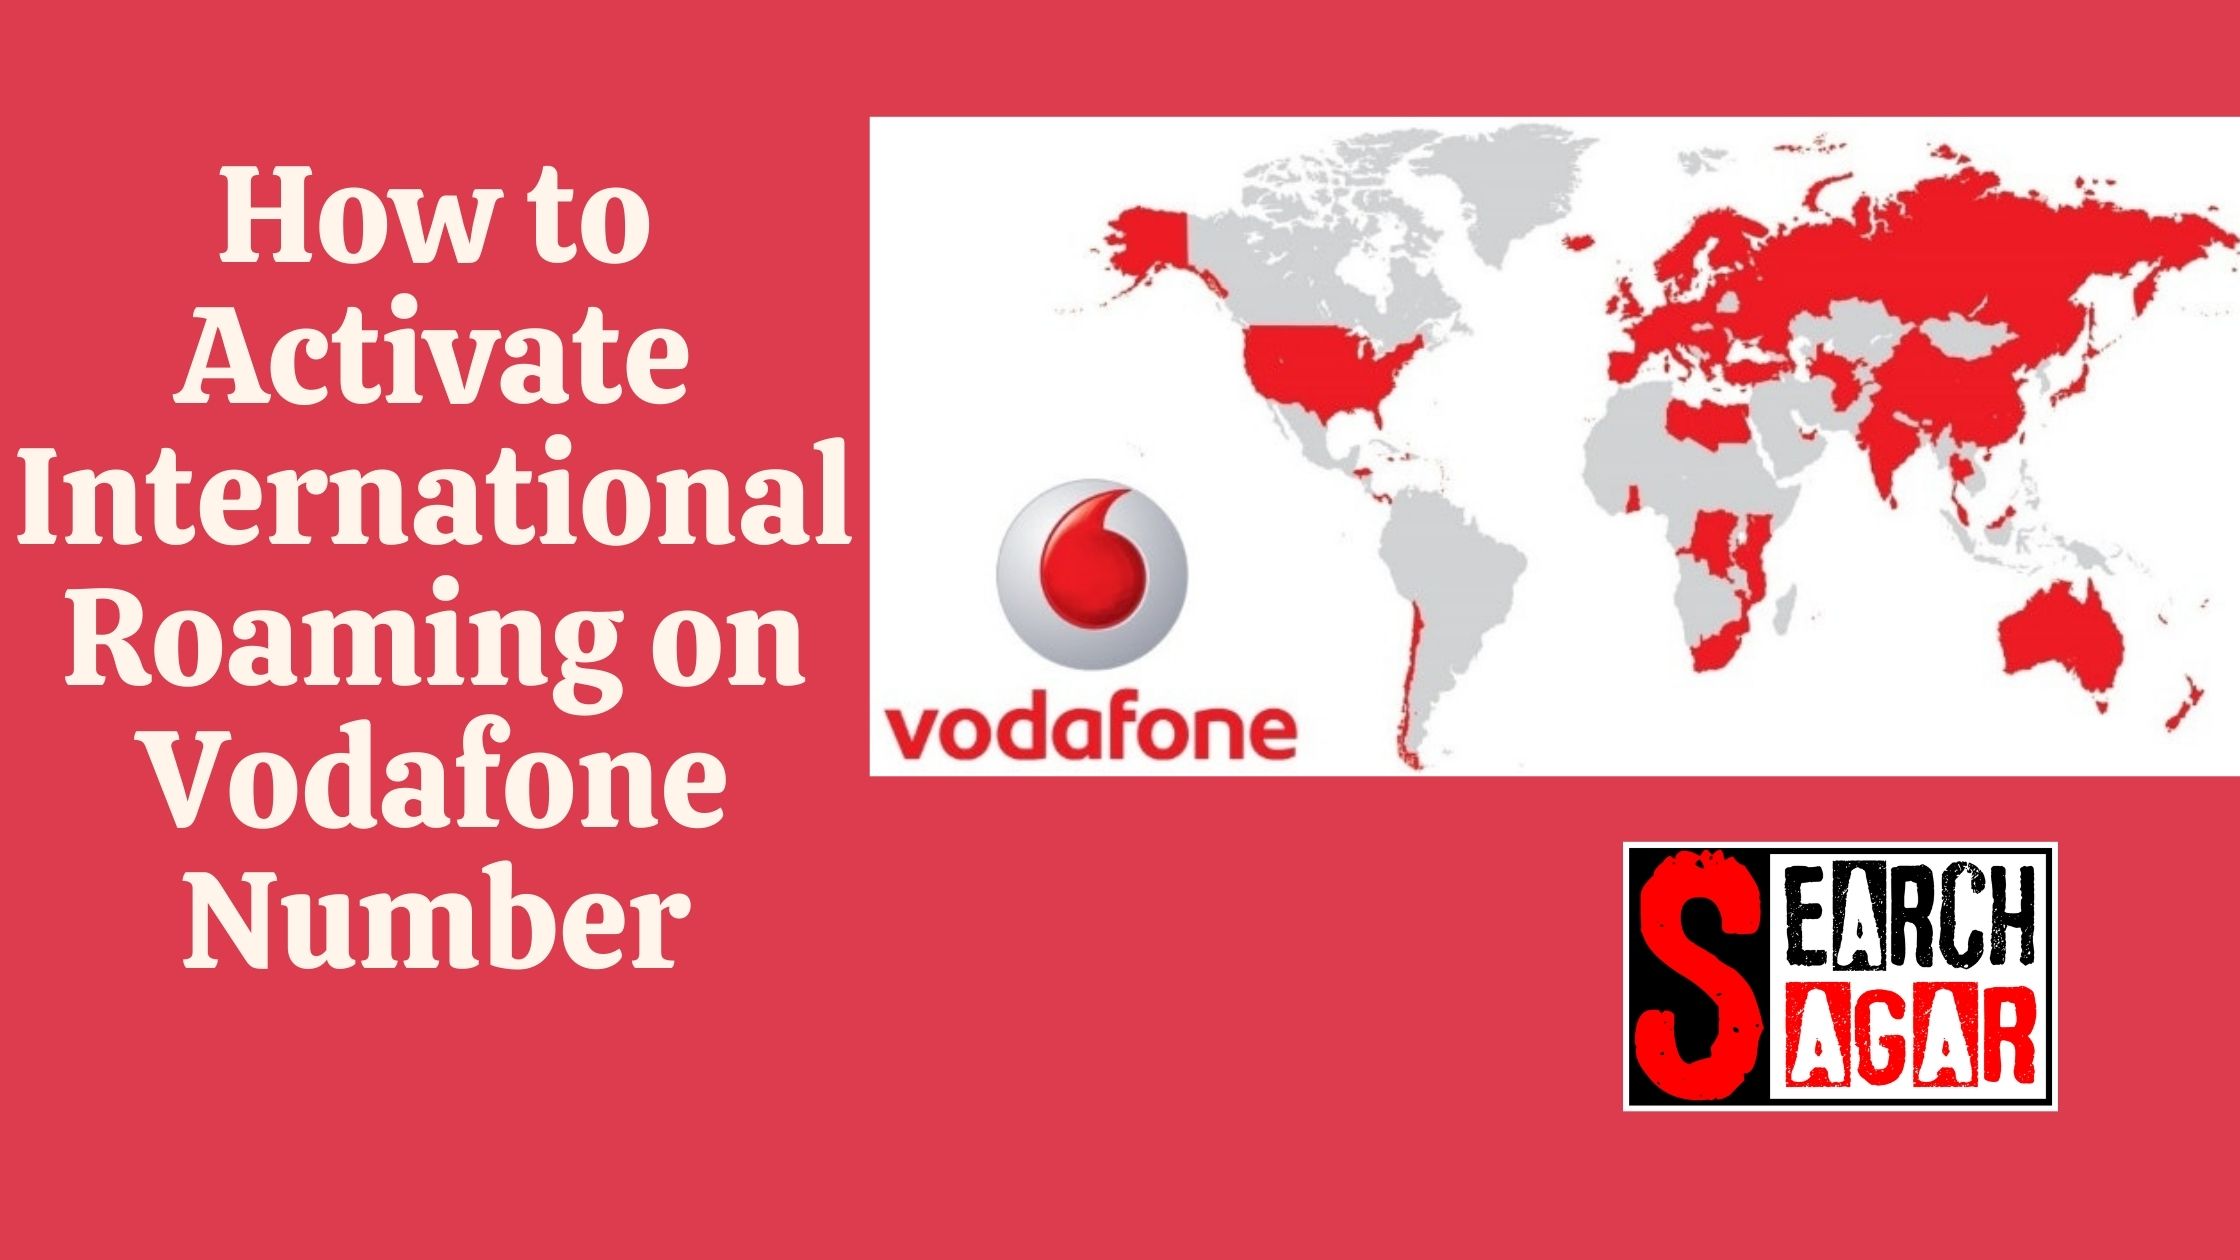 How to Activate International Roaming on Vodafone Number